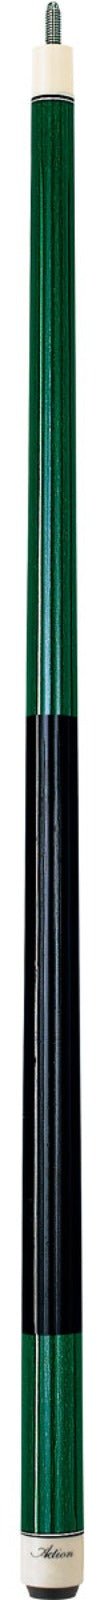 Action STR02 - Green Pool Cue -Action